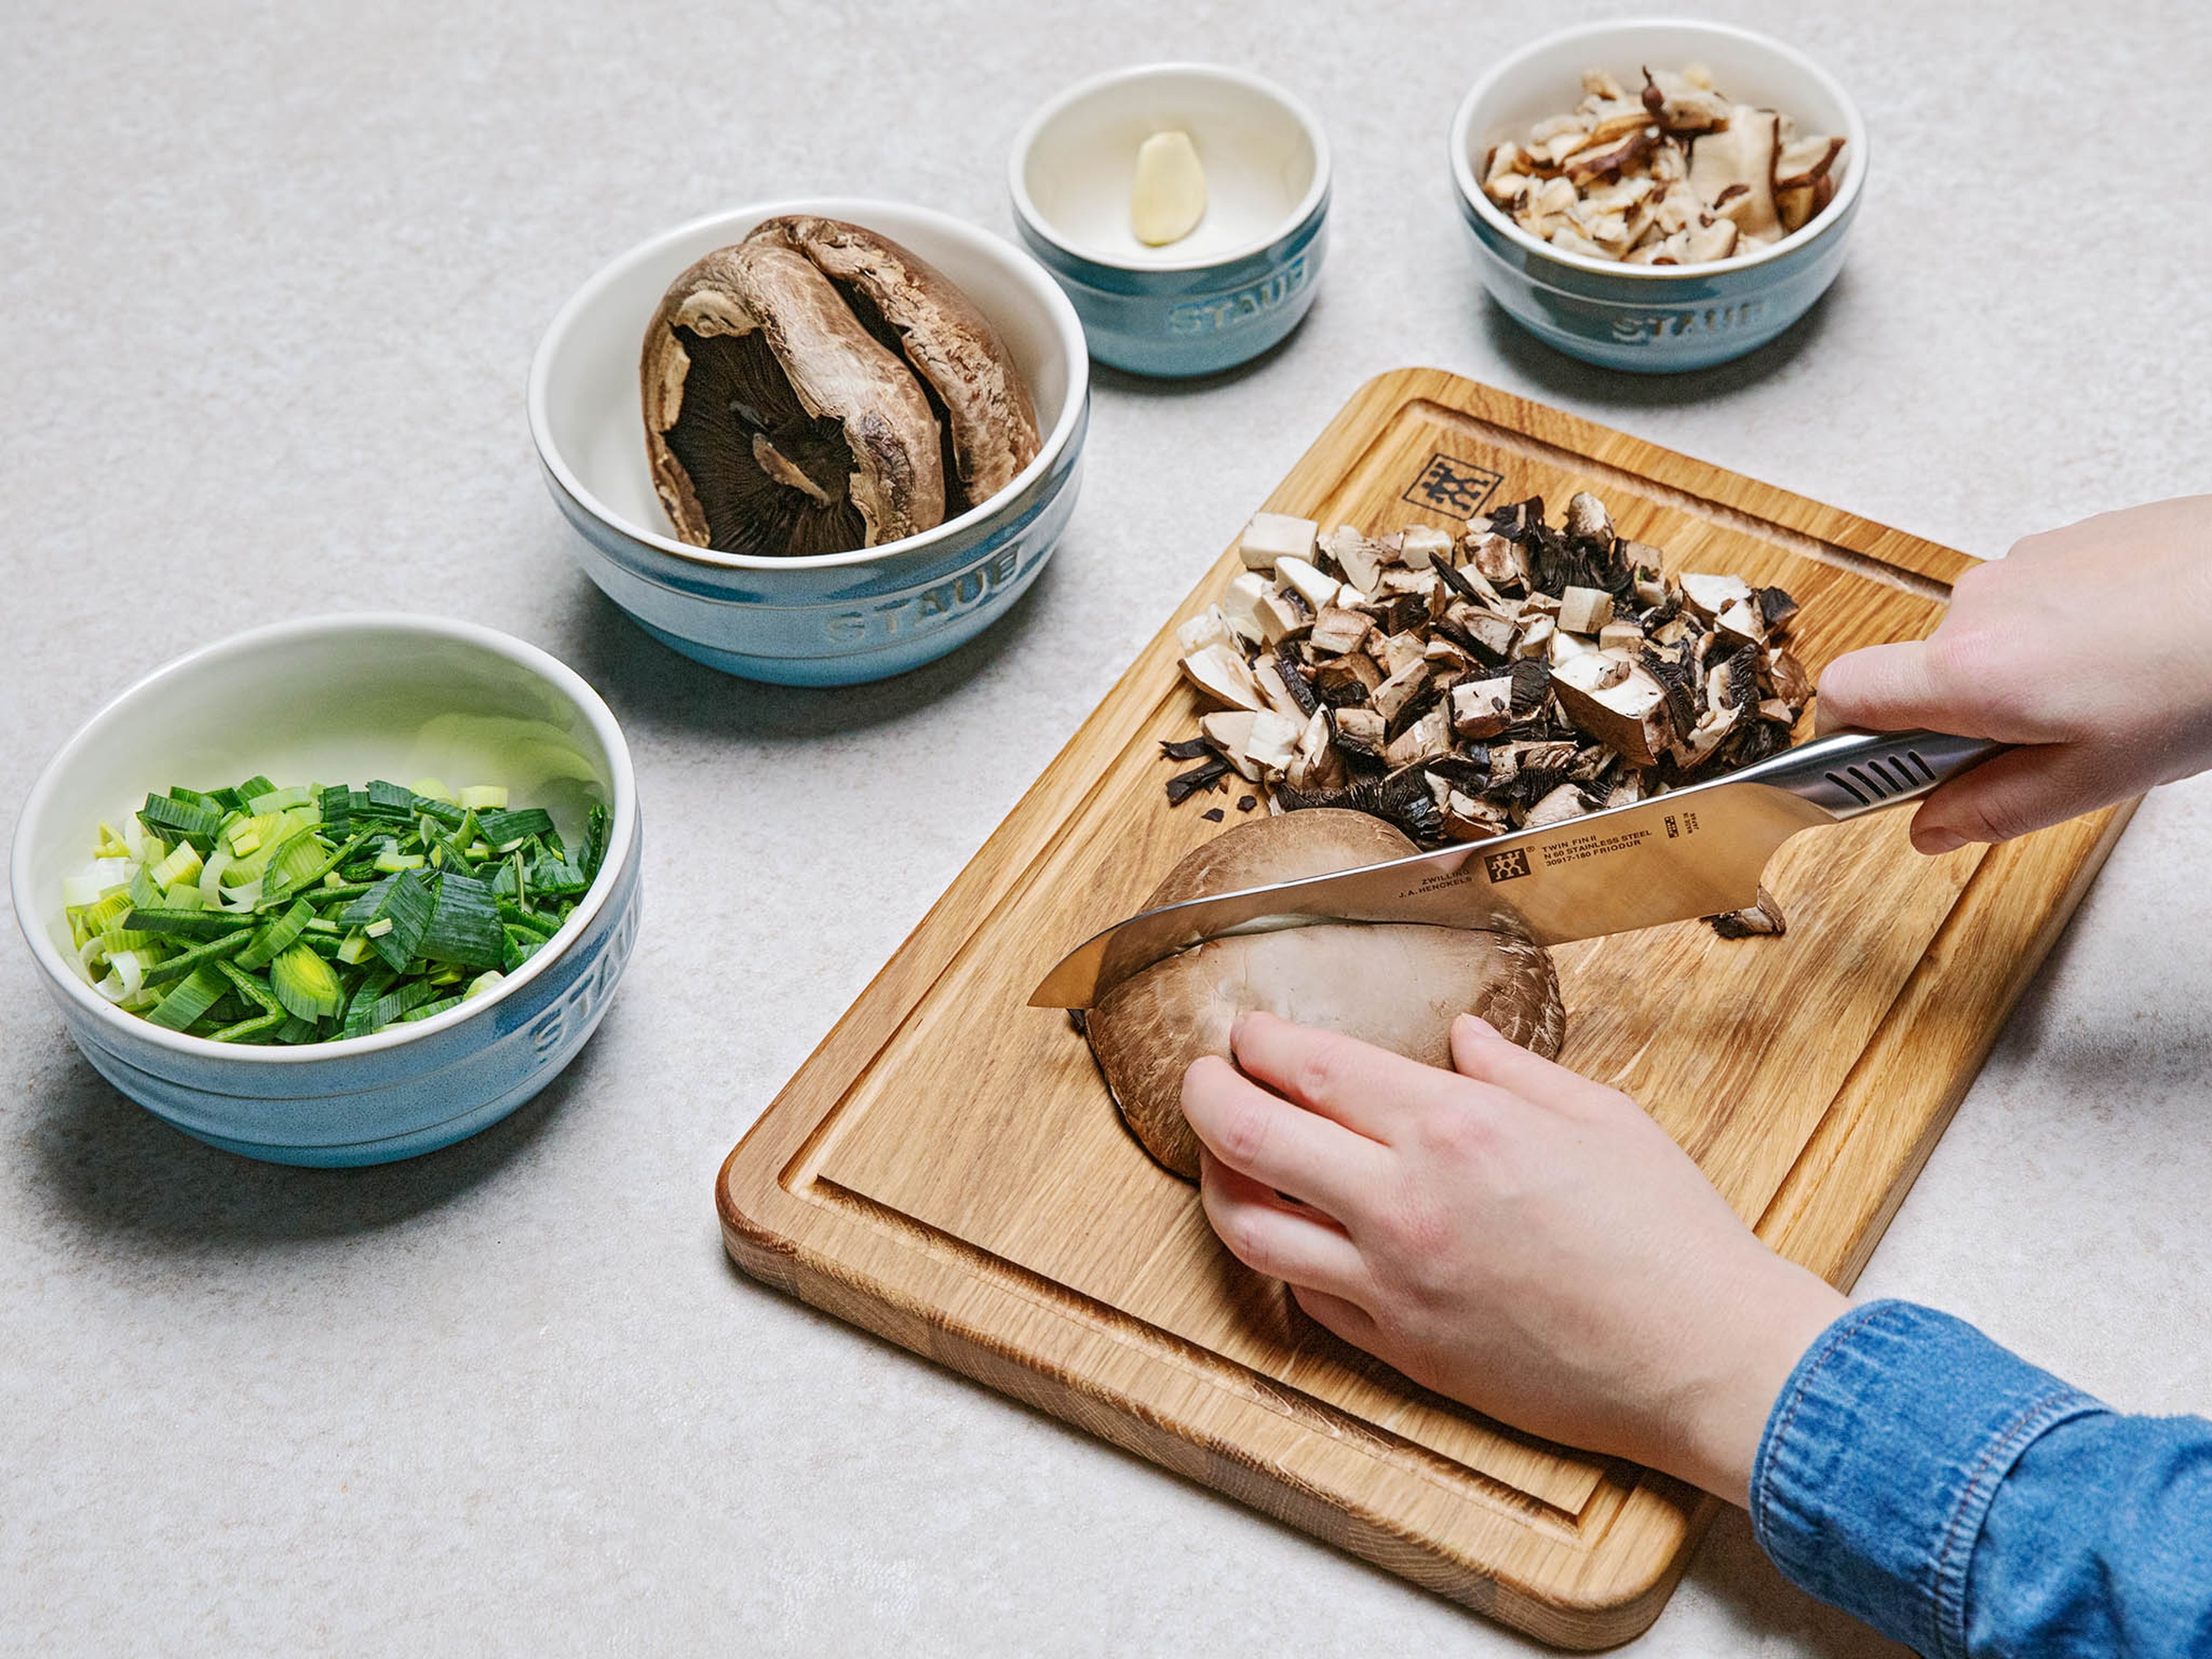 Transfer dried shiitake mushrooms to a heatproof bowl and pour in enough hot water to cover them. Let sit for approx. 20 mins. Thinly slice leeks. Chop portobello mushrooms. Drain and finely chop the shiitake mushrooms. Peel and mince garlic.